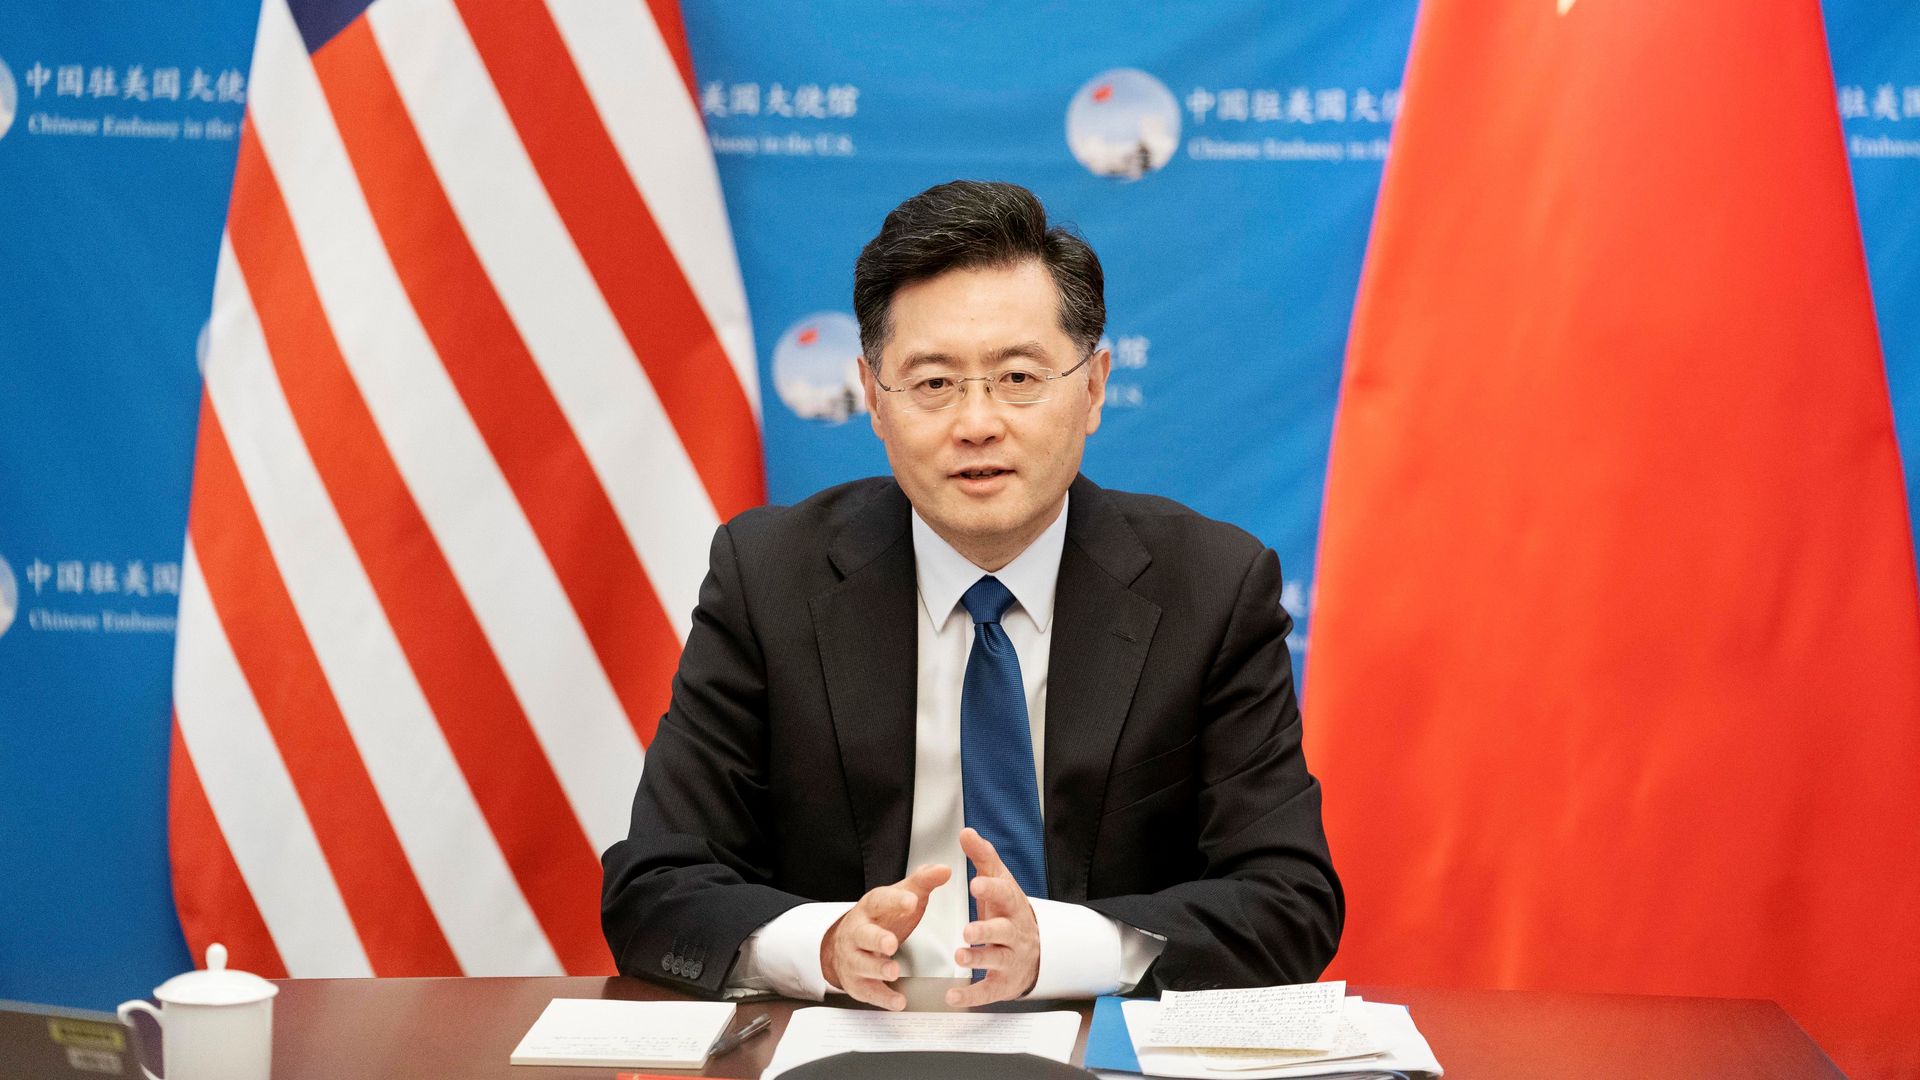 Chinese Ambassador to the United States Qin Gang has been named as China's new foreign minister